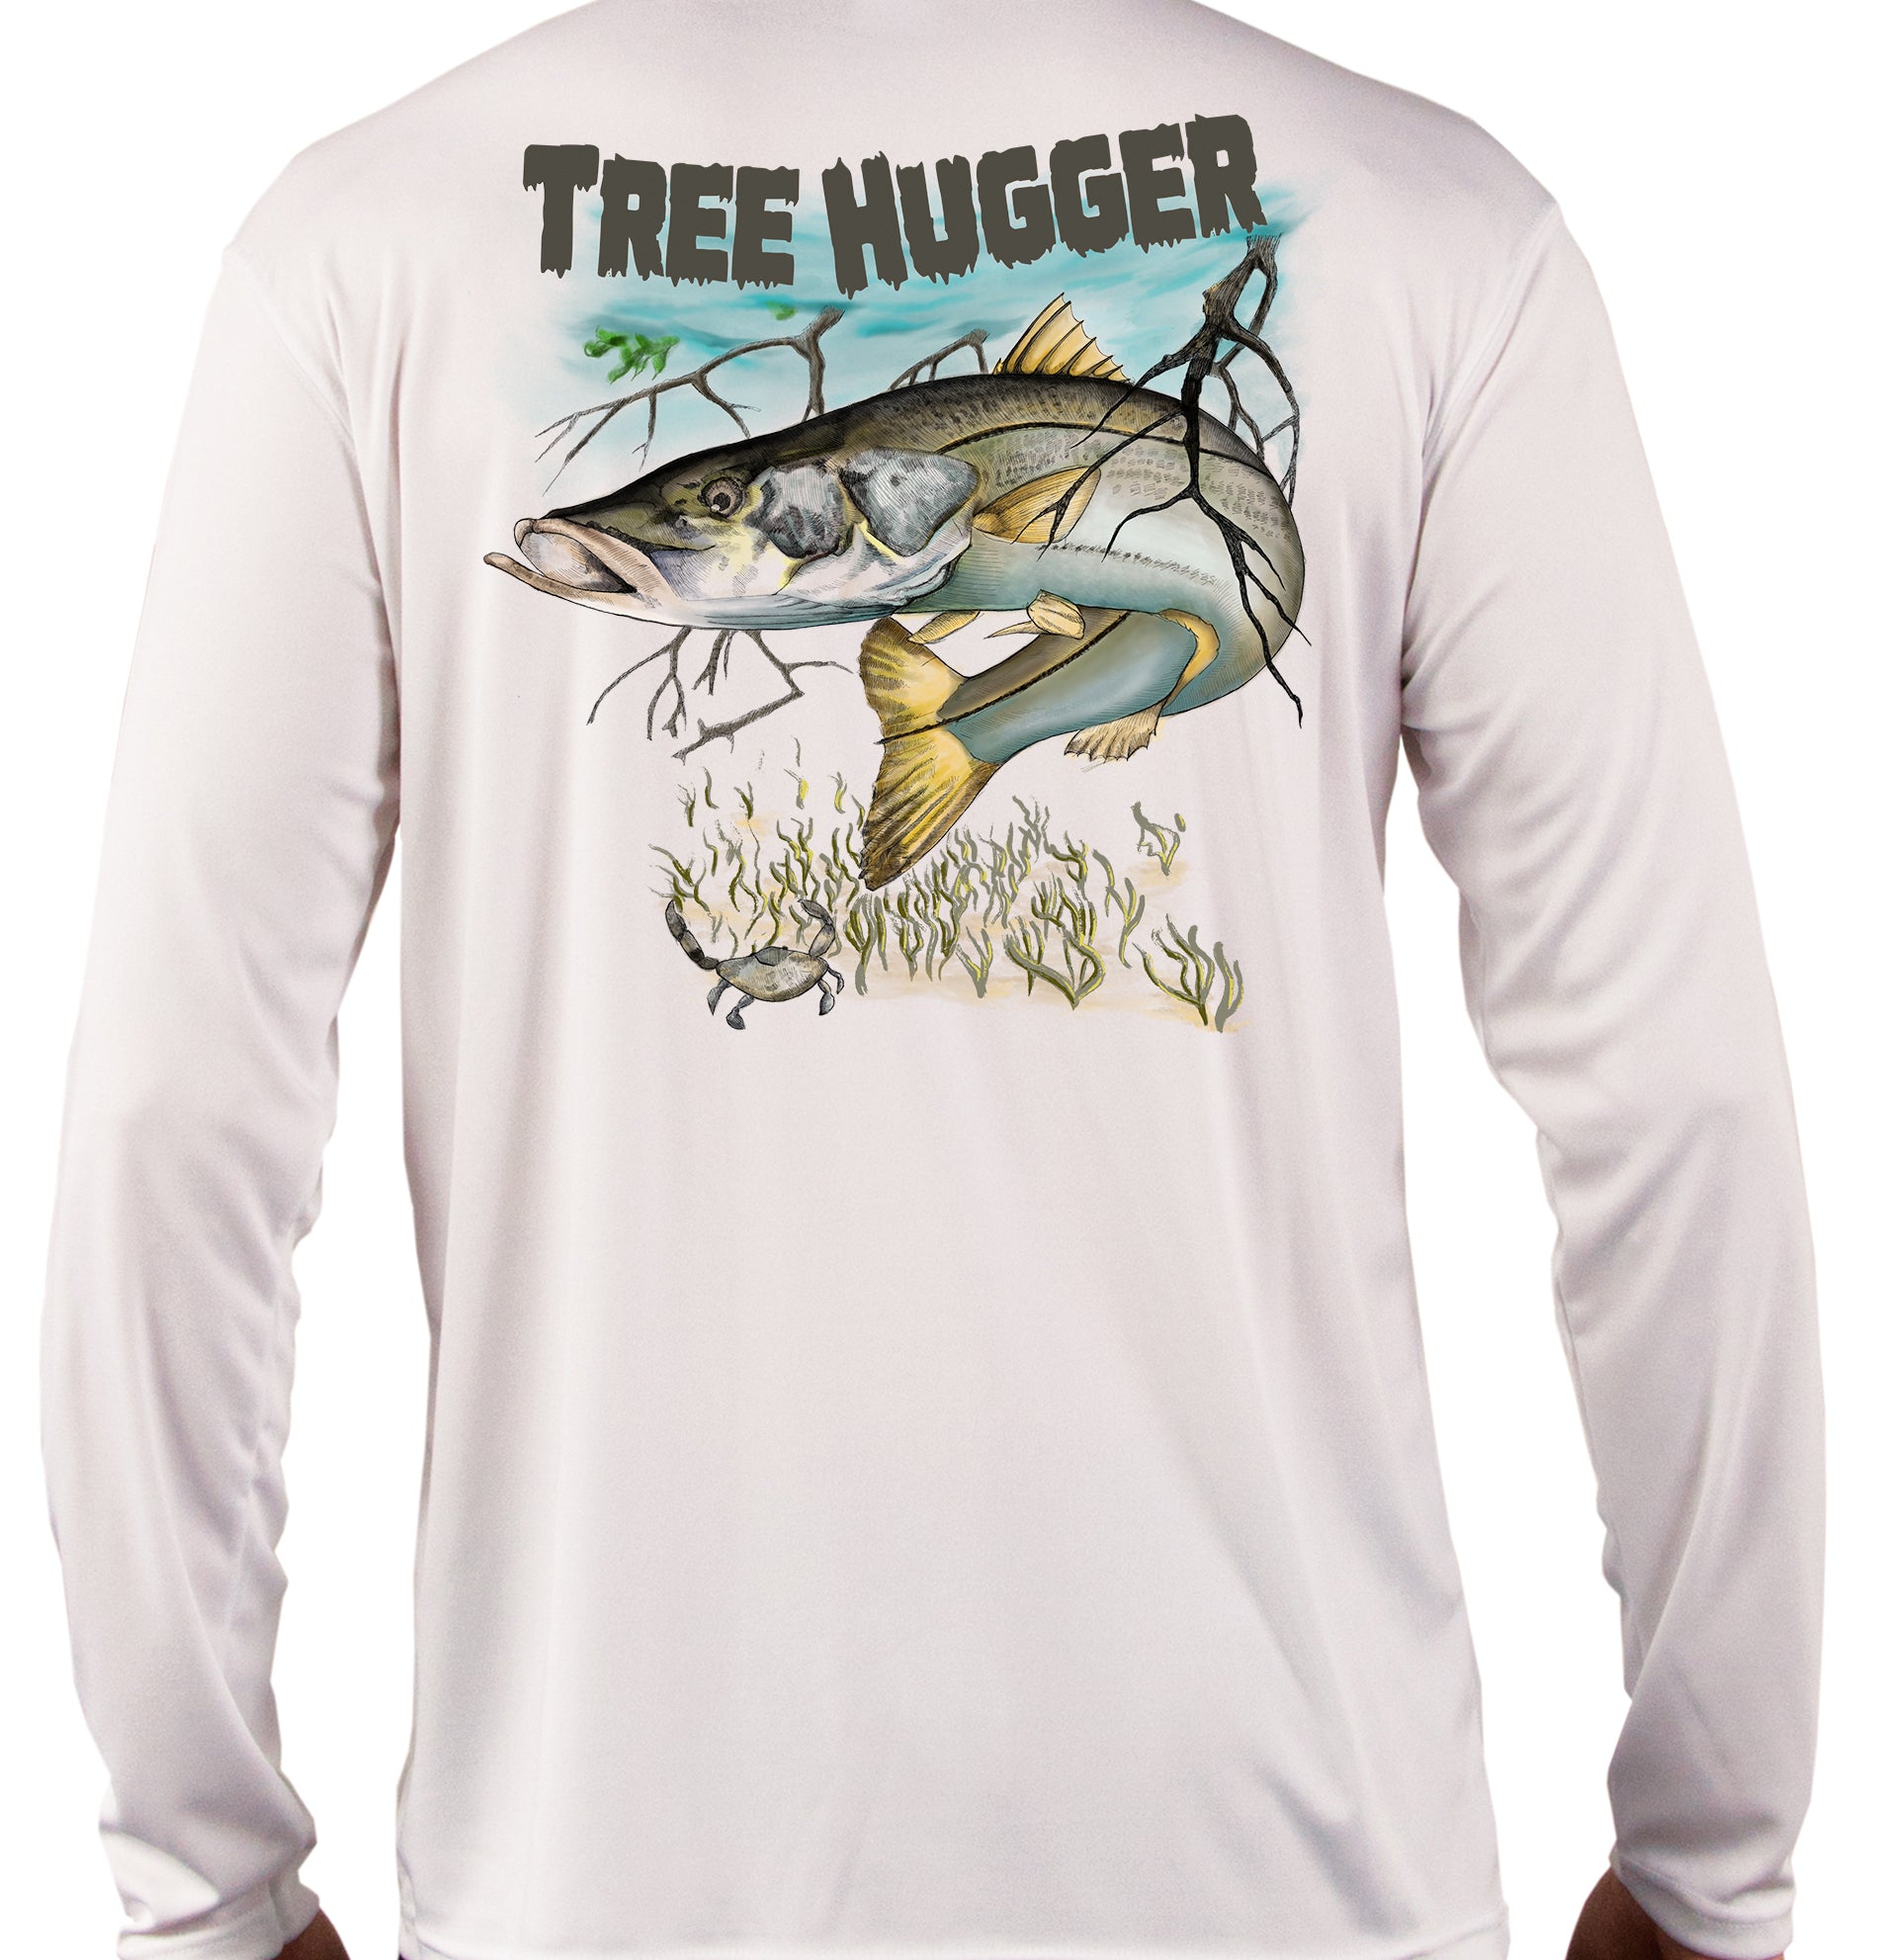 Mens Fish T Shirts, Tree Fish, Fish and Forest Tee, Fishing Shirt for Men, Camping Shirt, Fishing Trip, Retirement Gift, Vacation Tshirt